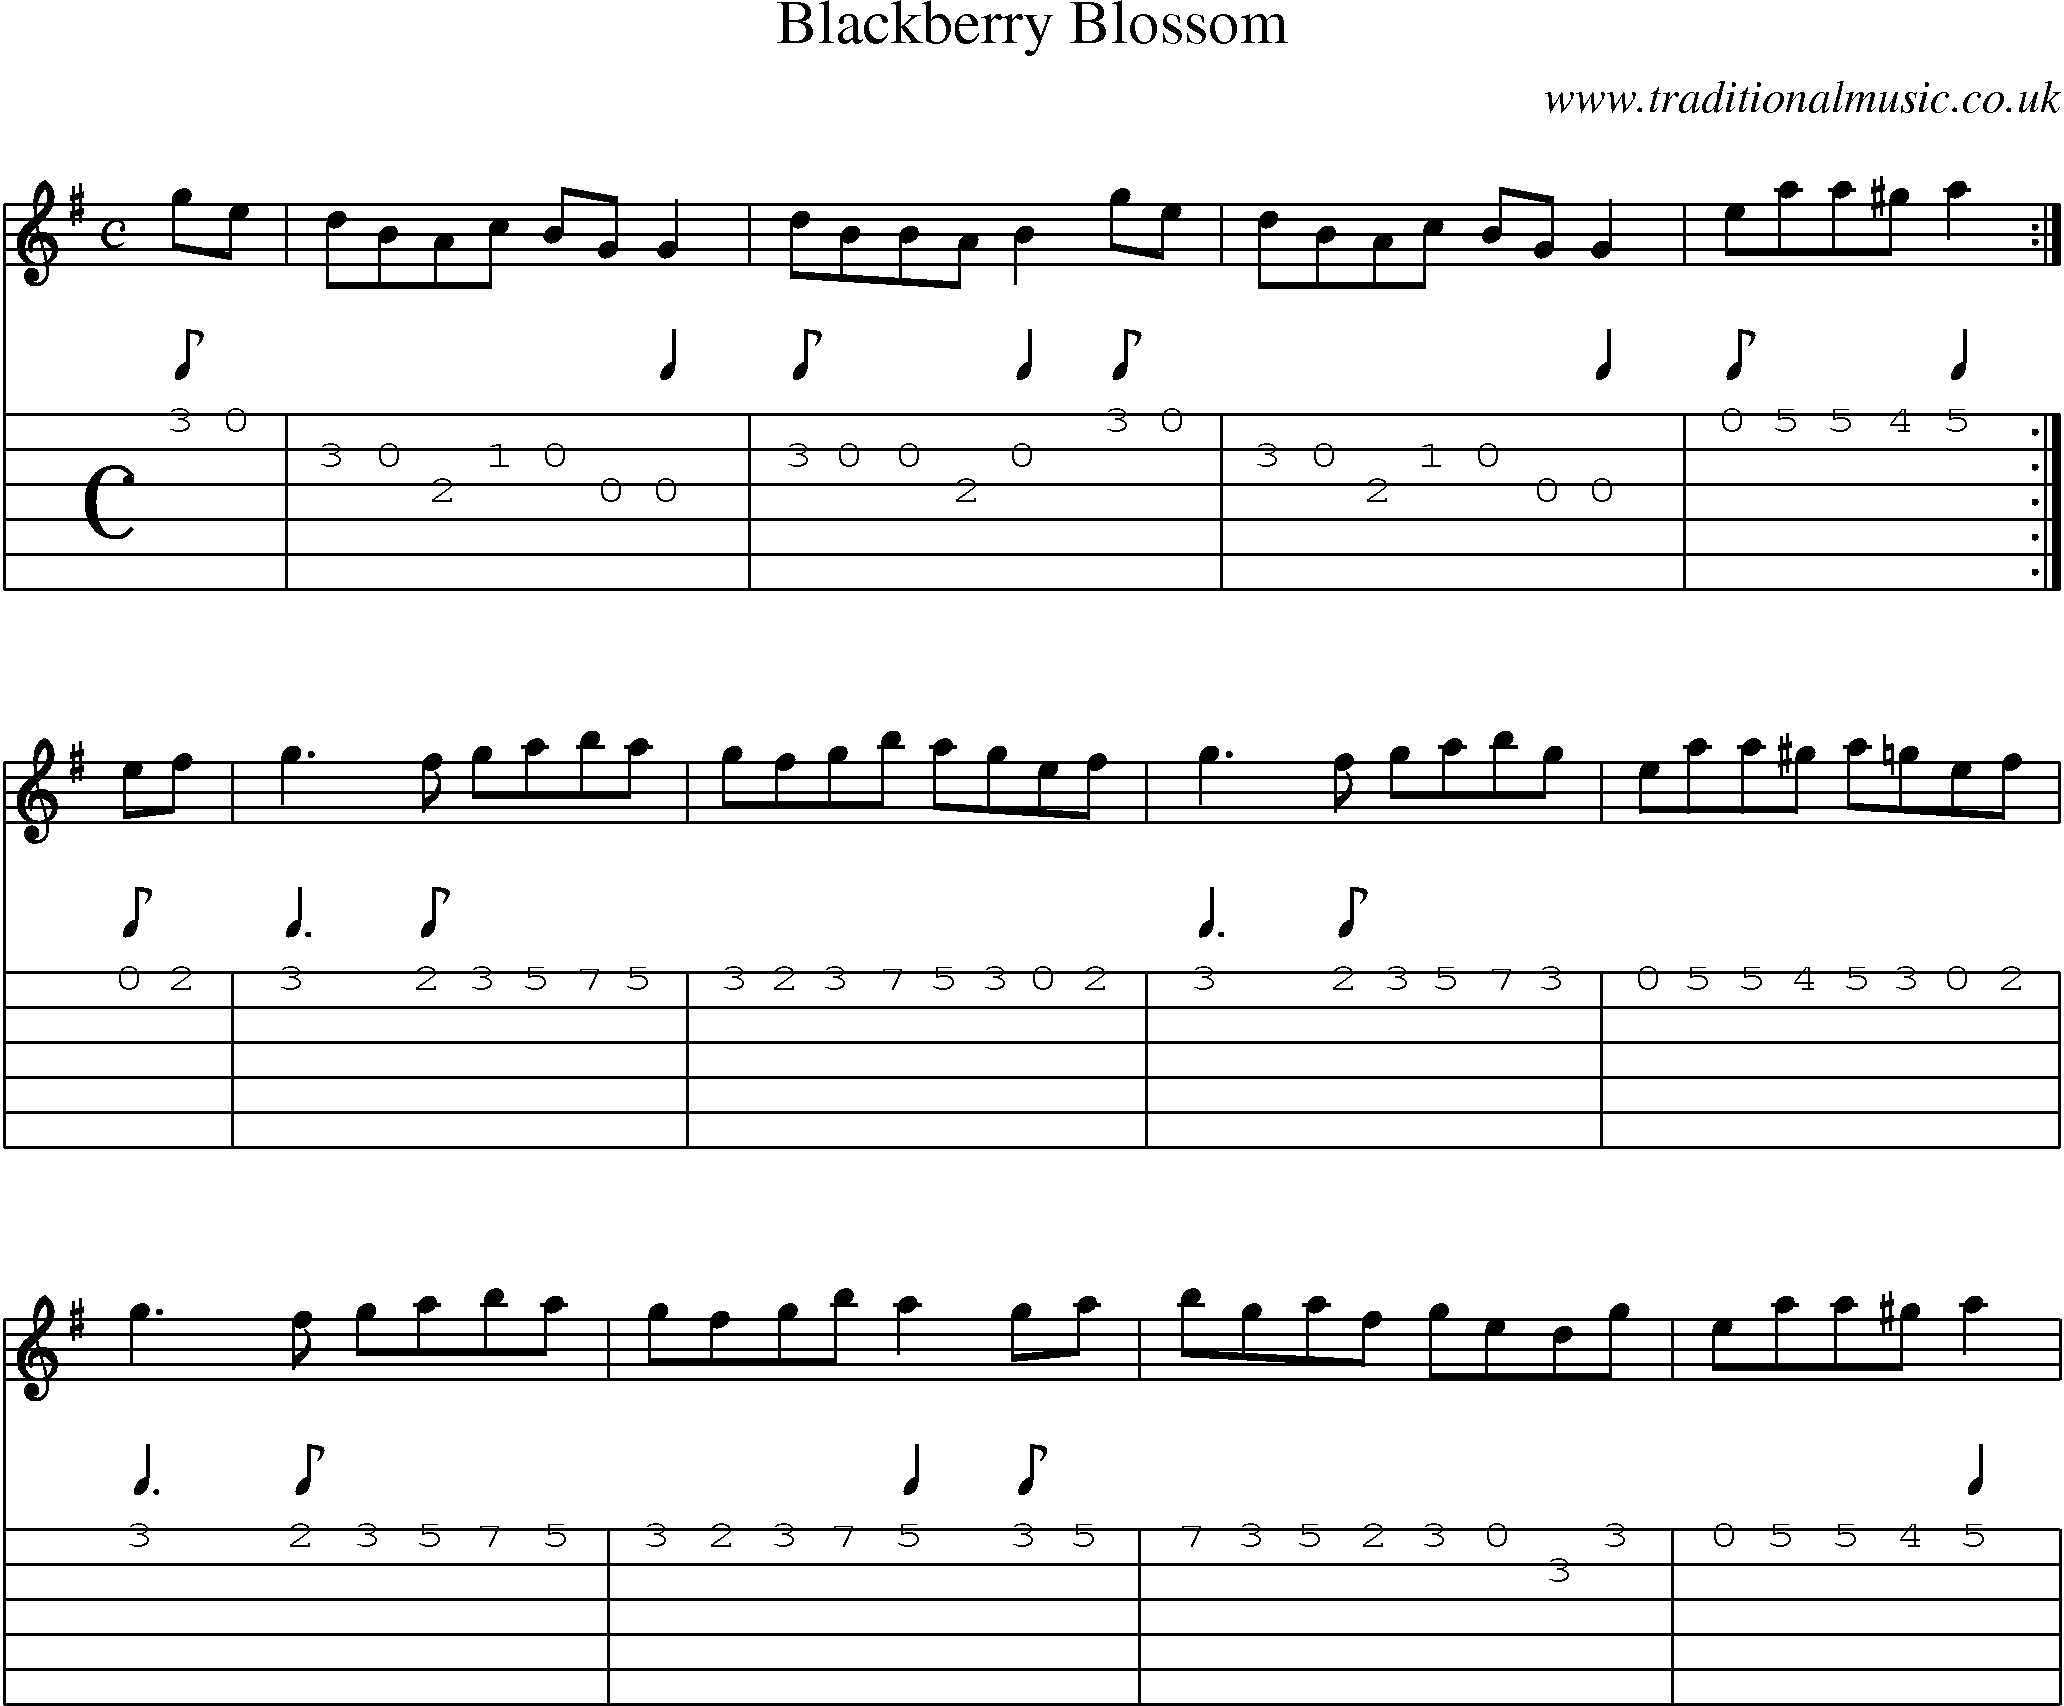 Music Score and Guitar Tabs for Blackberry Blossom